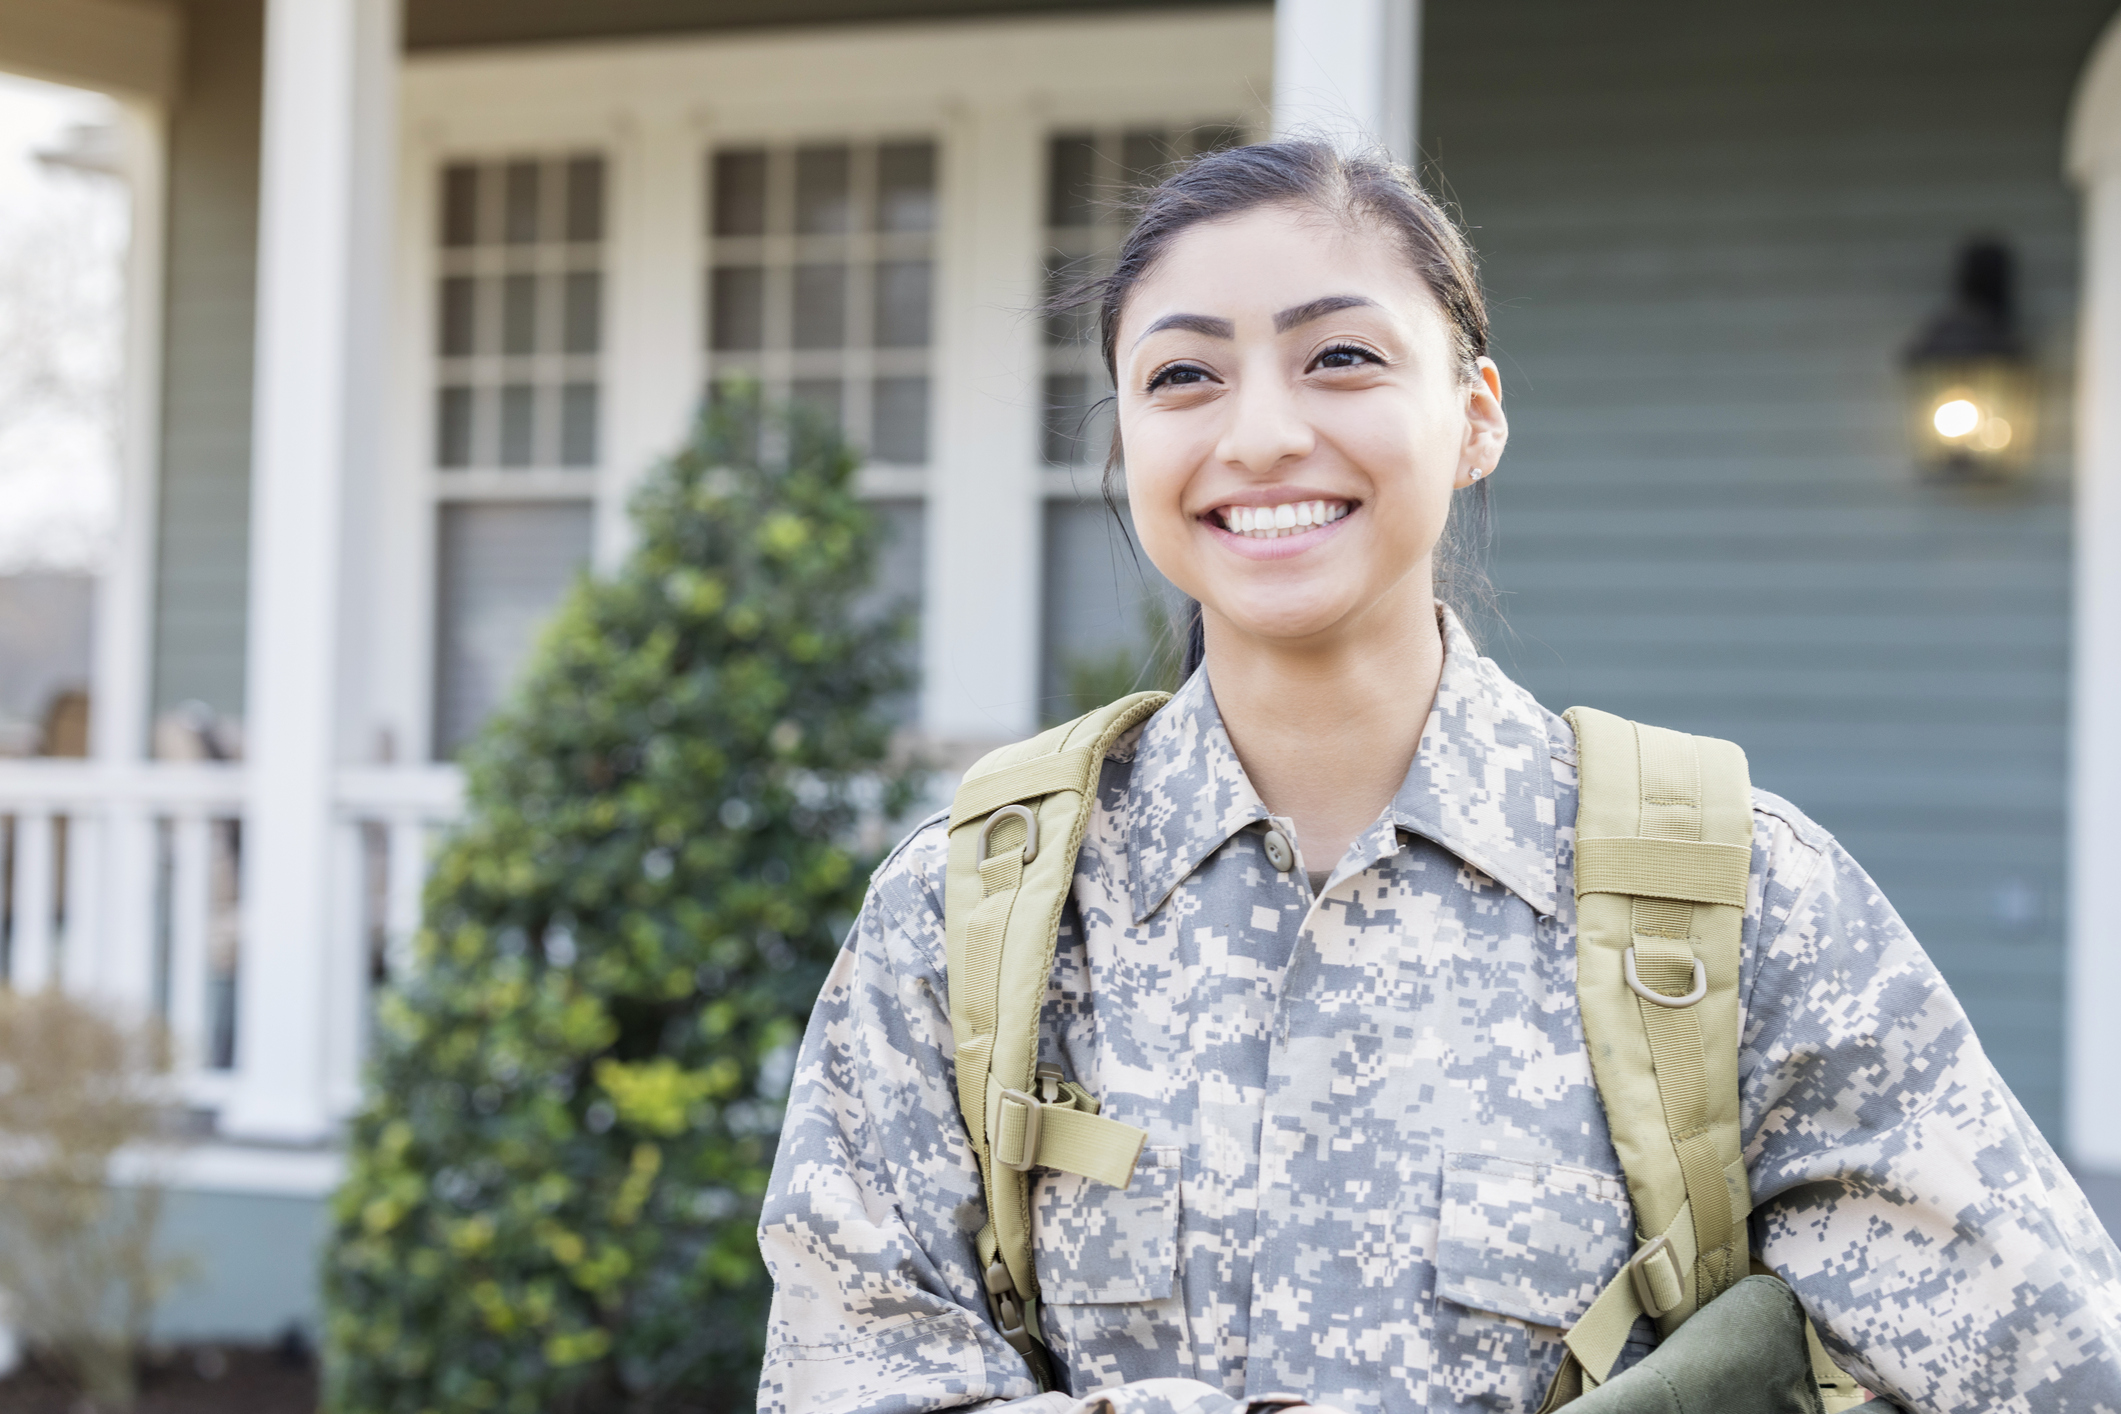 How To Get a Civilian Job in the Military